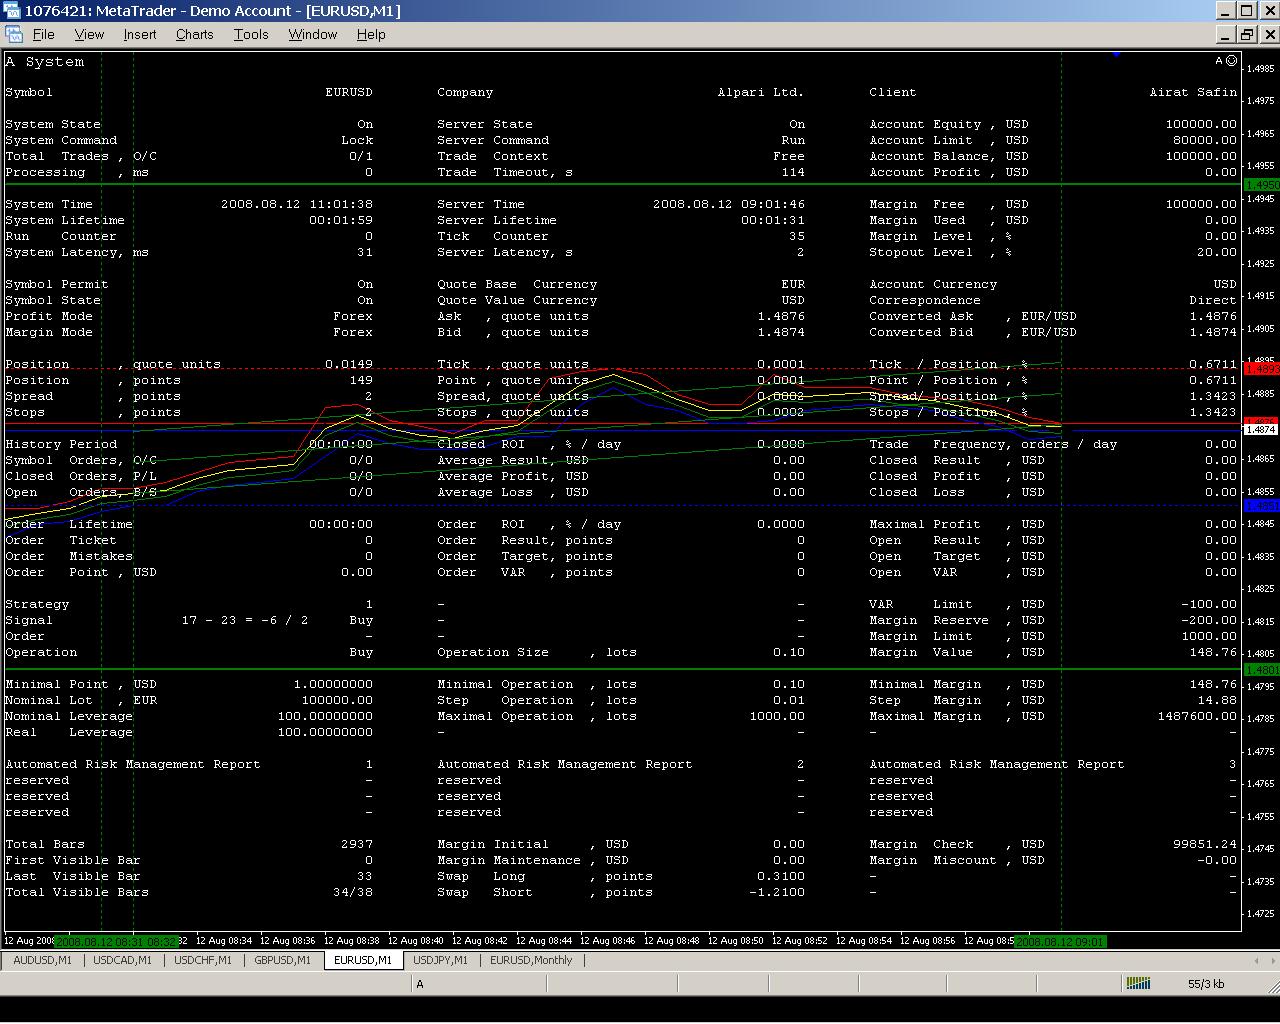 Automation sample for the MetaTrader 4 Client Terminal ...